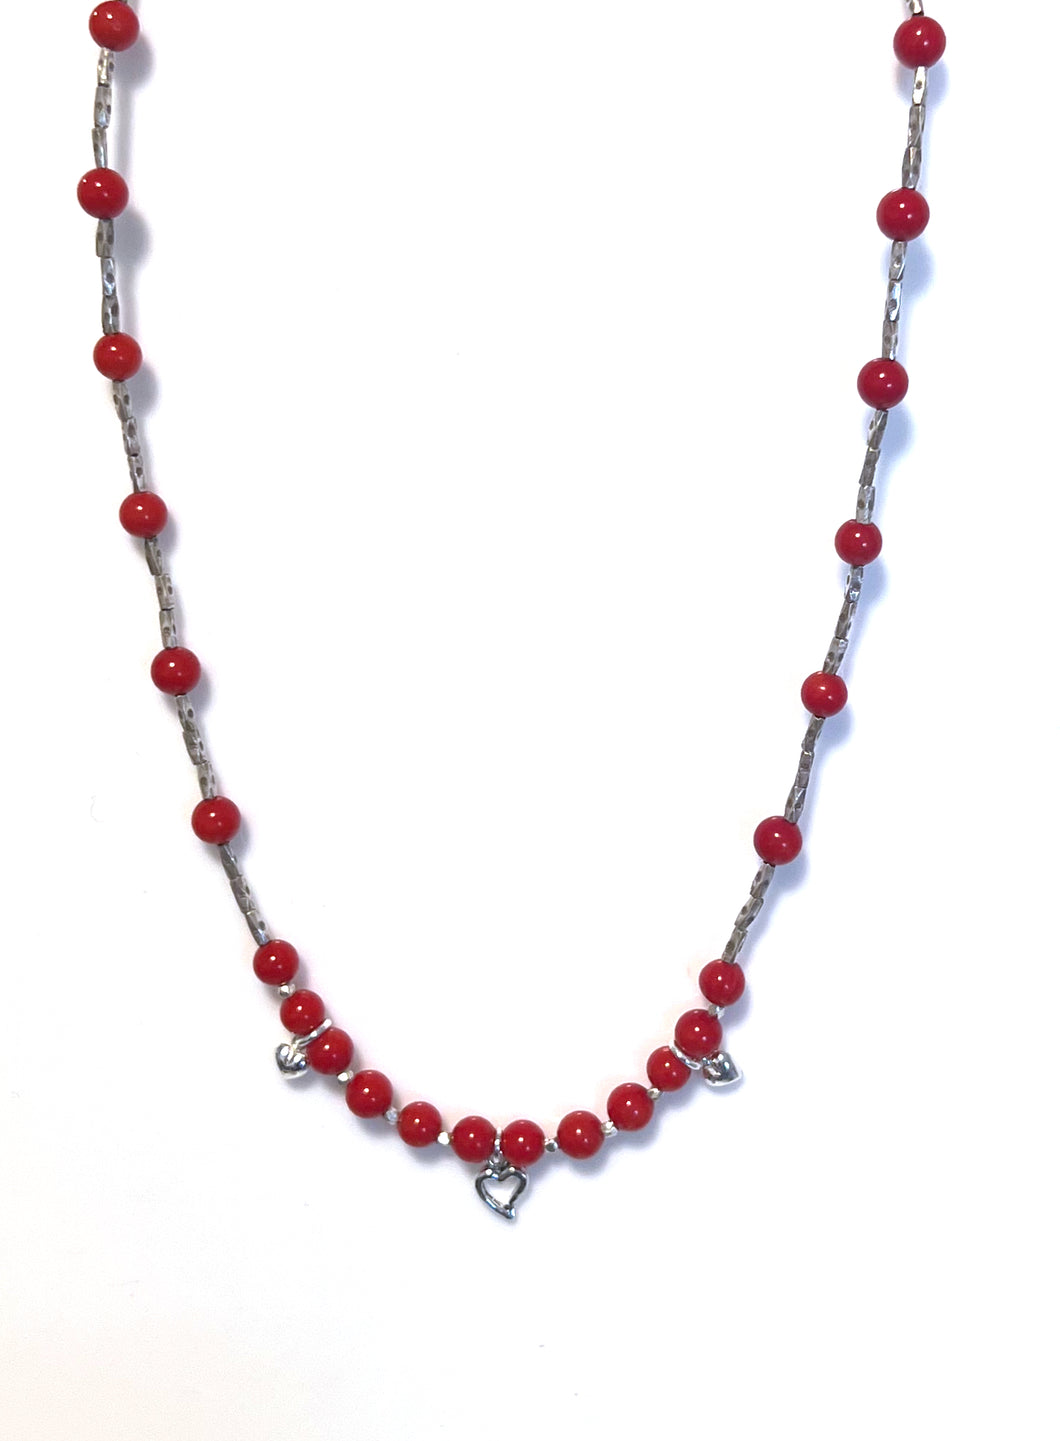 Australian Handmade Red Necklace with Coral and Sterling Silver